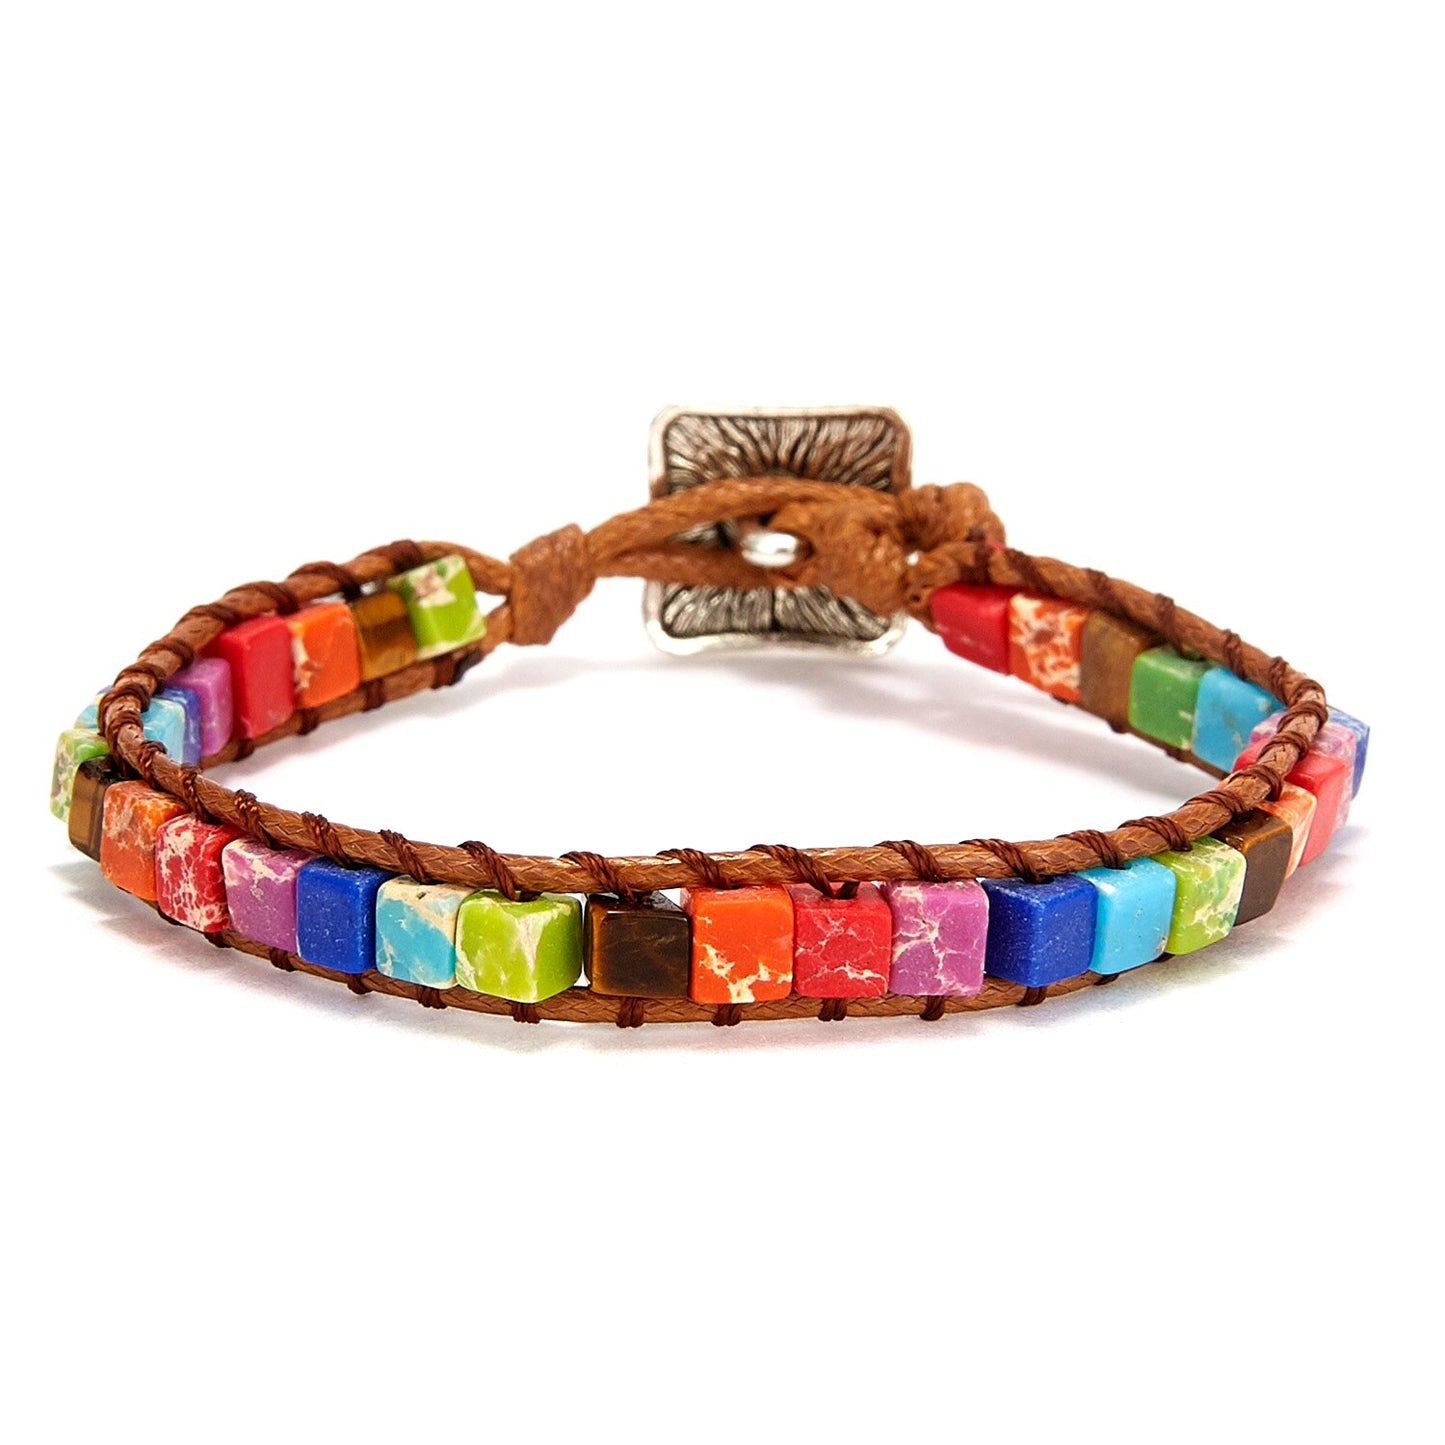 New Fashion Mixed Color Natural Stone Bracelet For Women Men Chakra Heart Wrap Leather Chain Bracelet&Bangle Charm Jewelry - BR18Y0734-1 / Adjustable